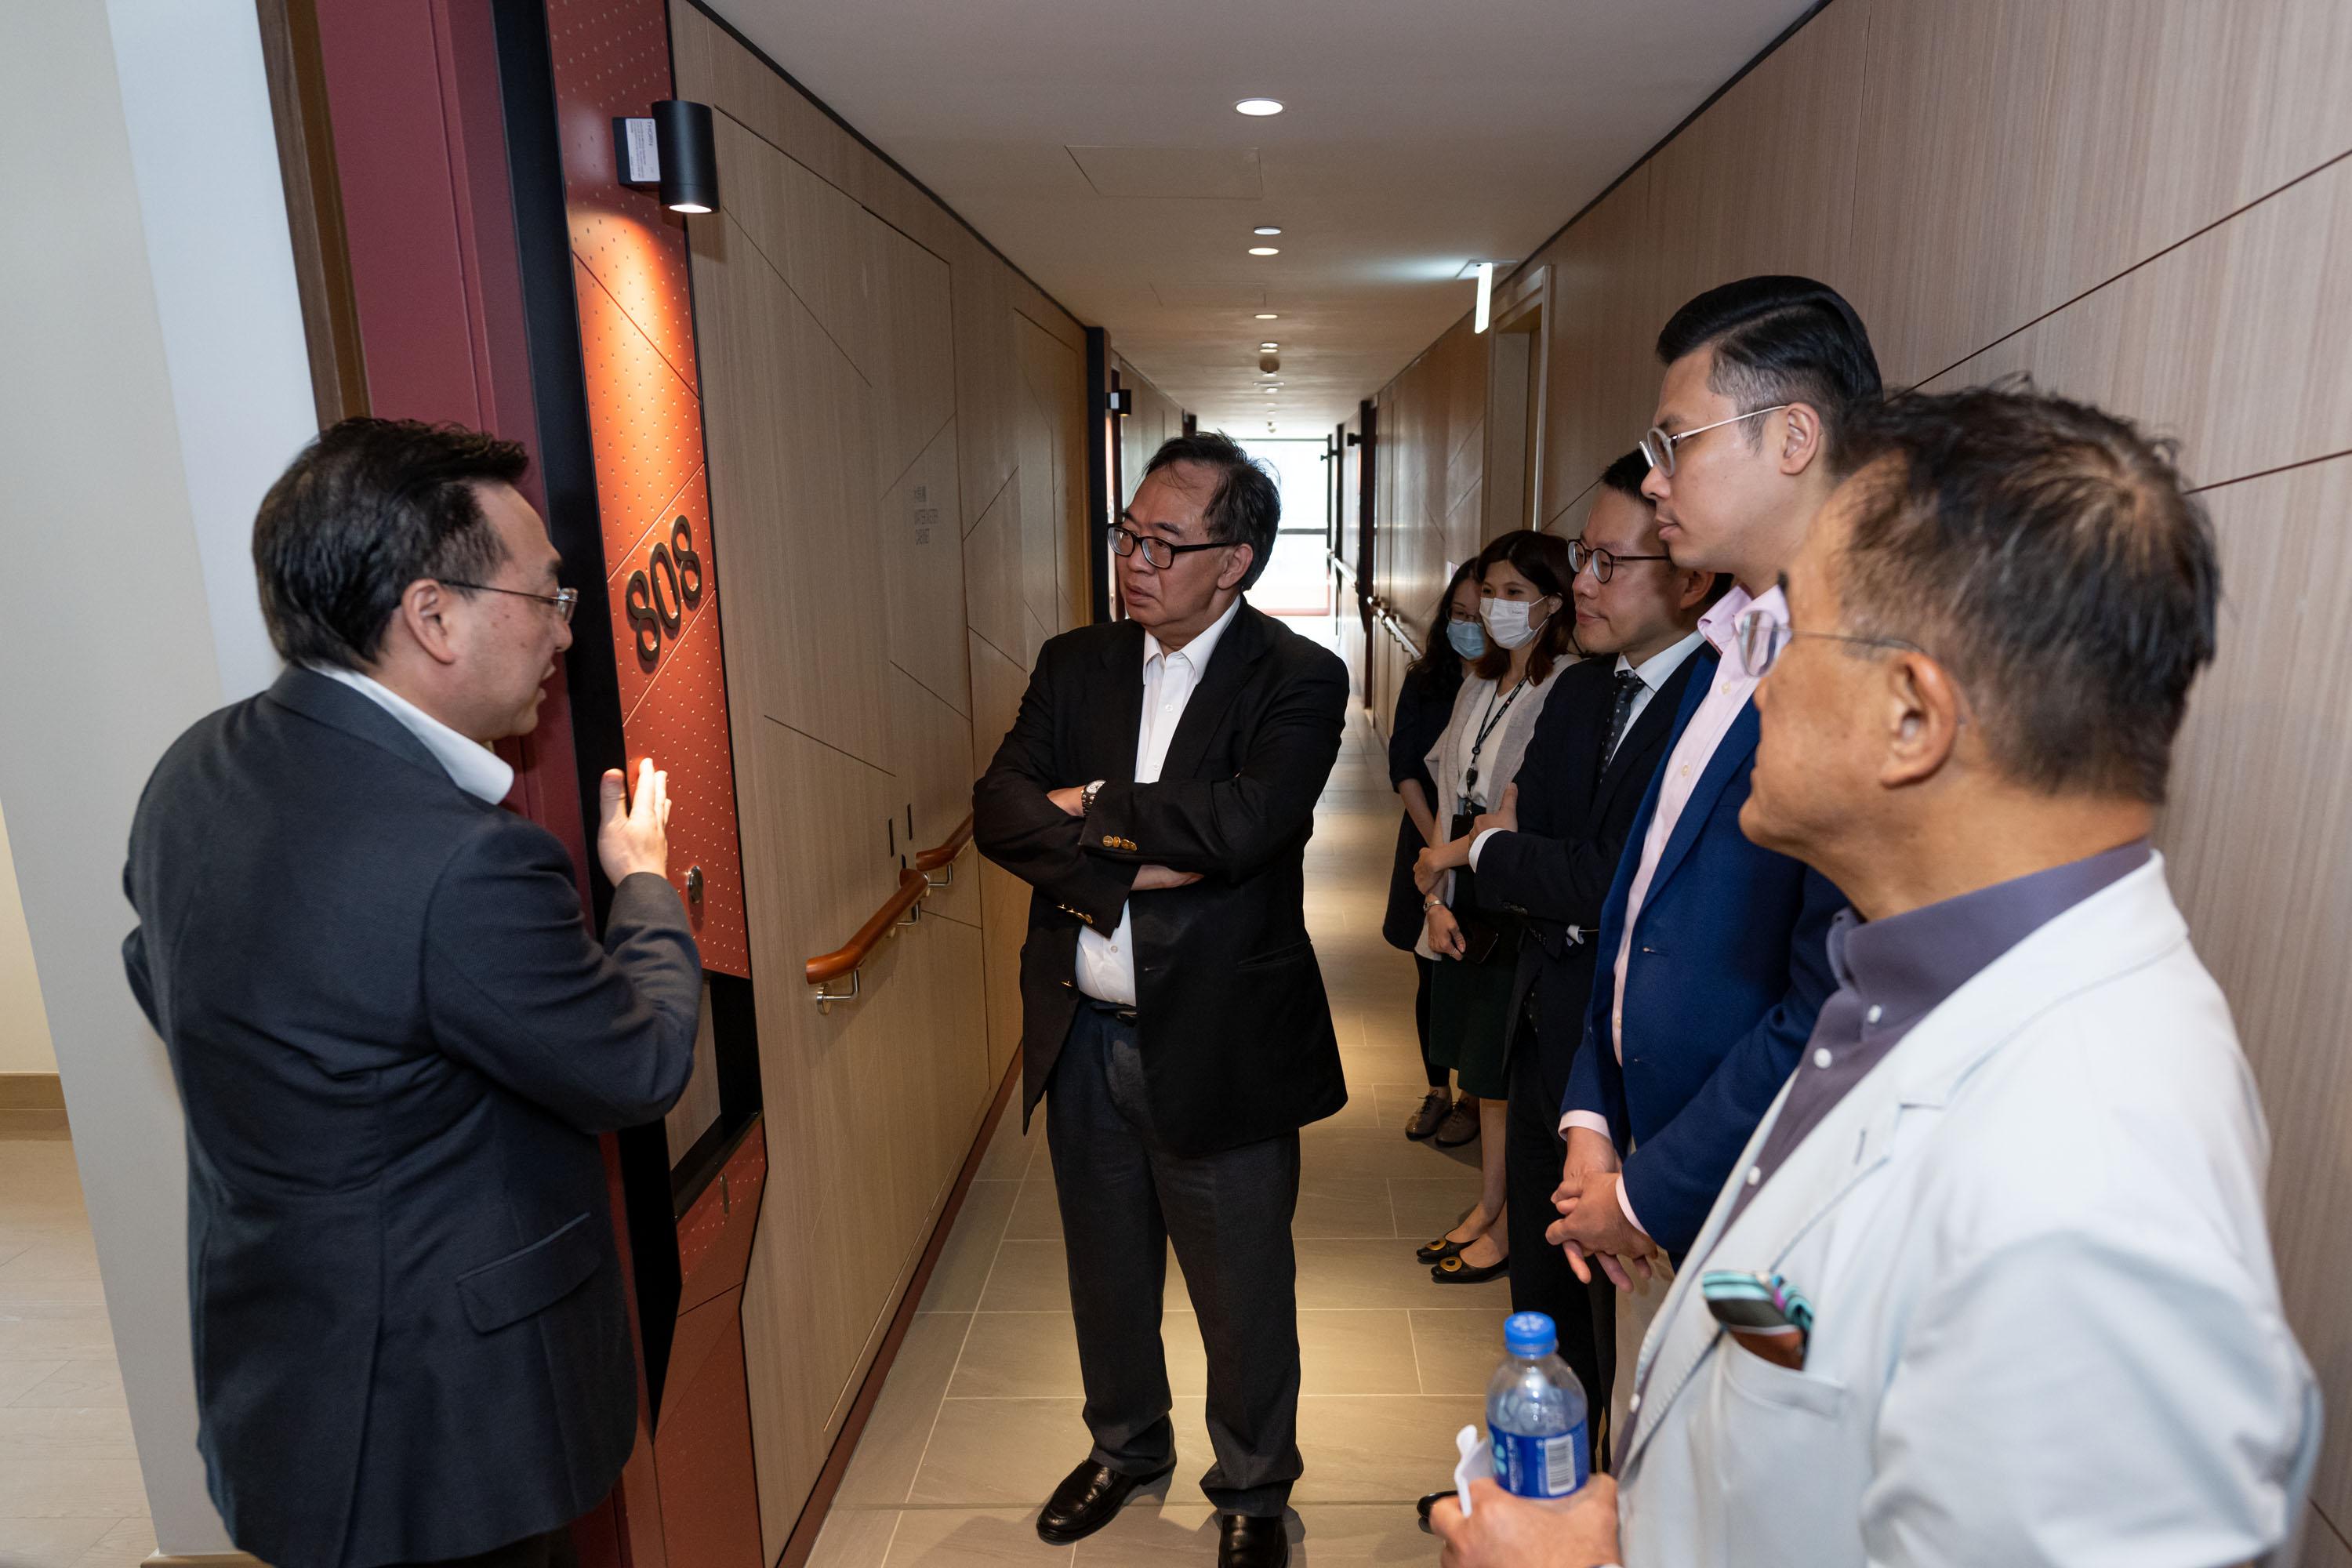 The Legislative Council (LegCo) Panel on Housing visited the Blissful Place of the Hong Kong Housing Society in Hung Hom today (June 2). Photo shows LegCo Members touring the thematic colour design at the residential floor of the Blissful Place.